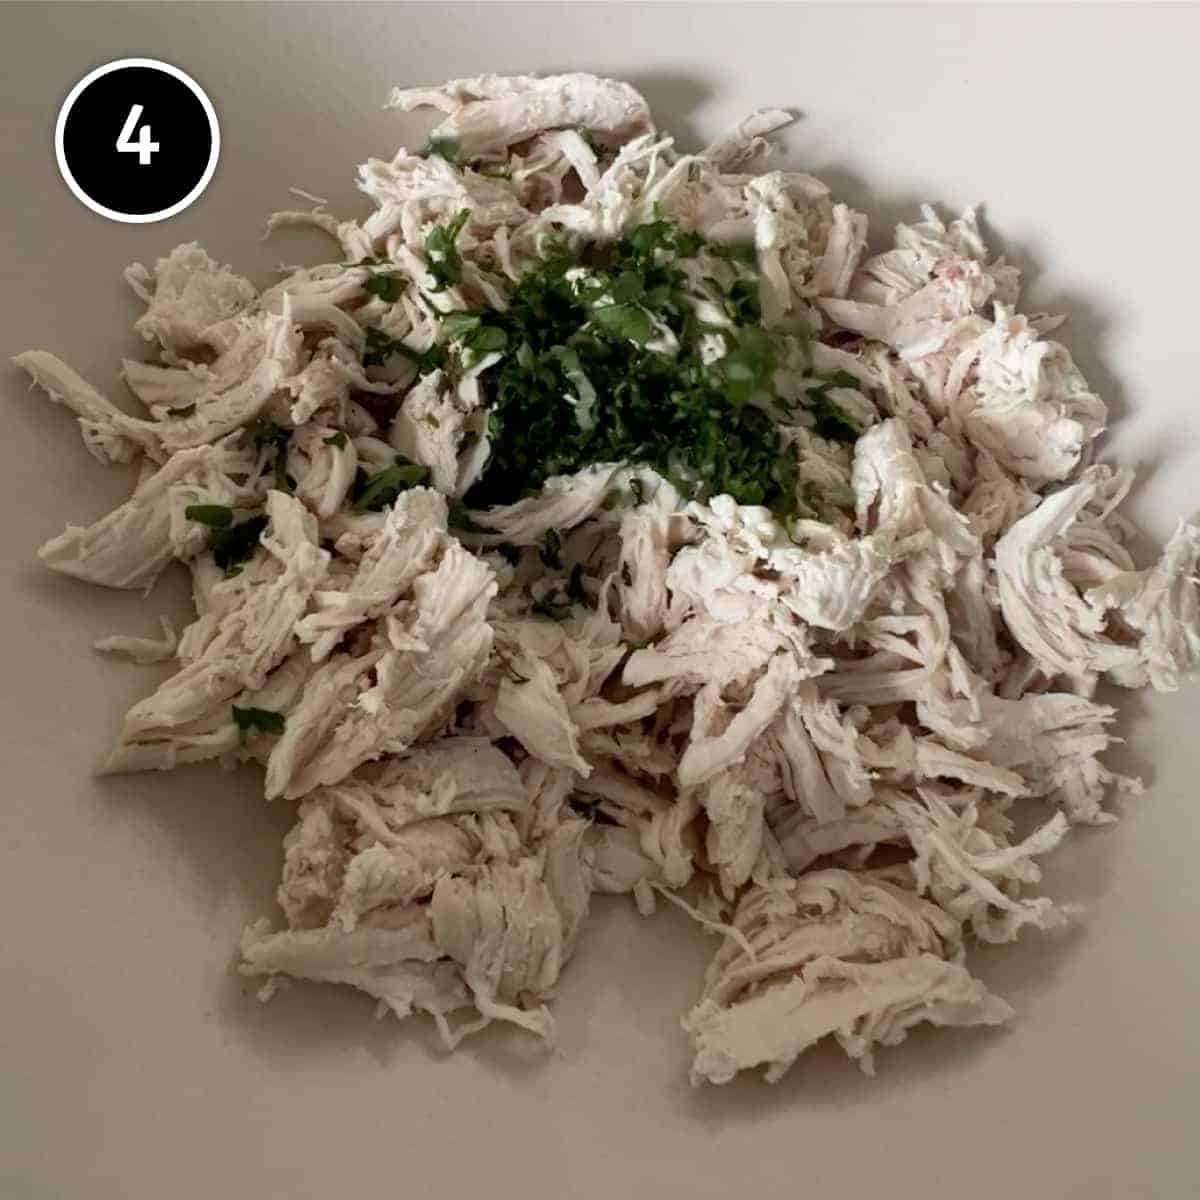 Shredded chicken in a bowl with parsley on top